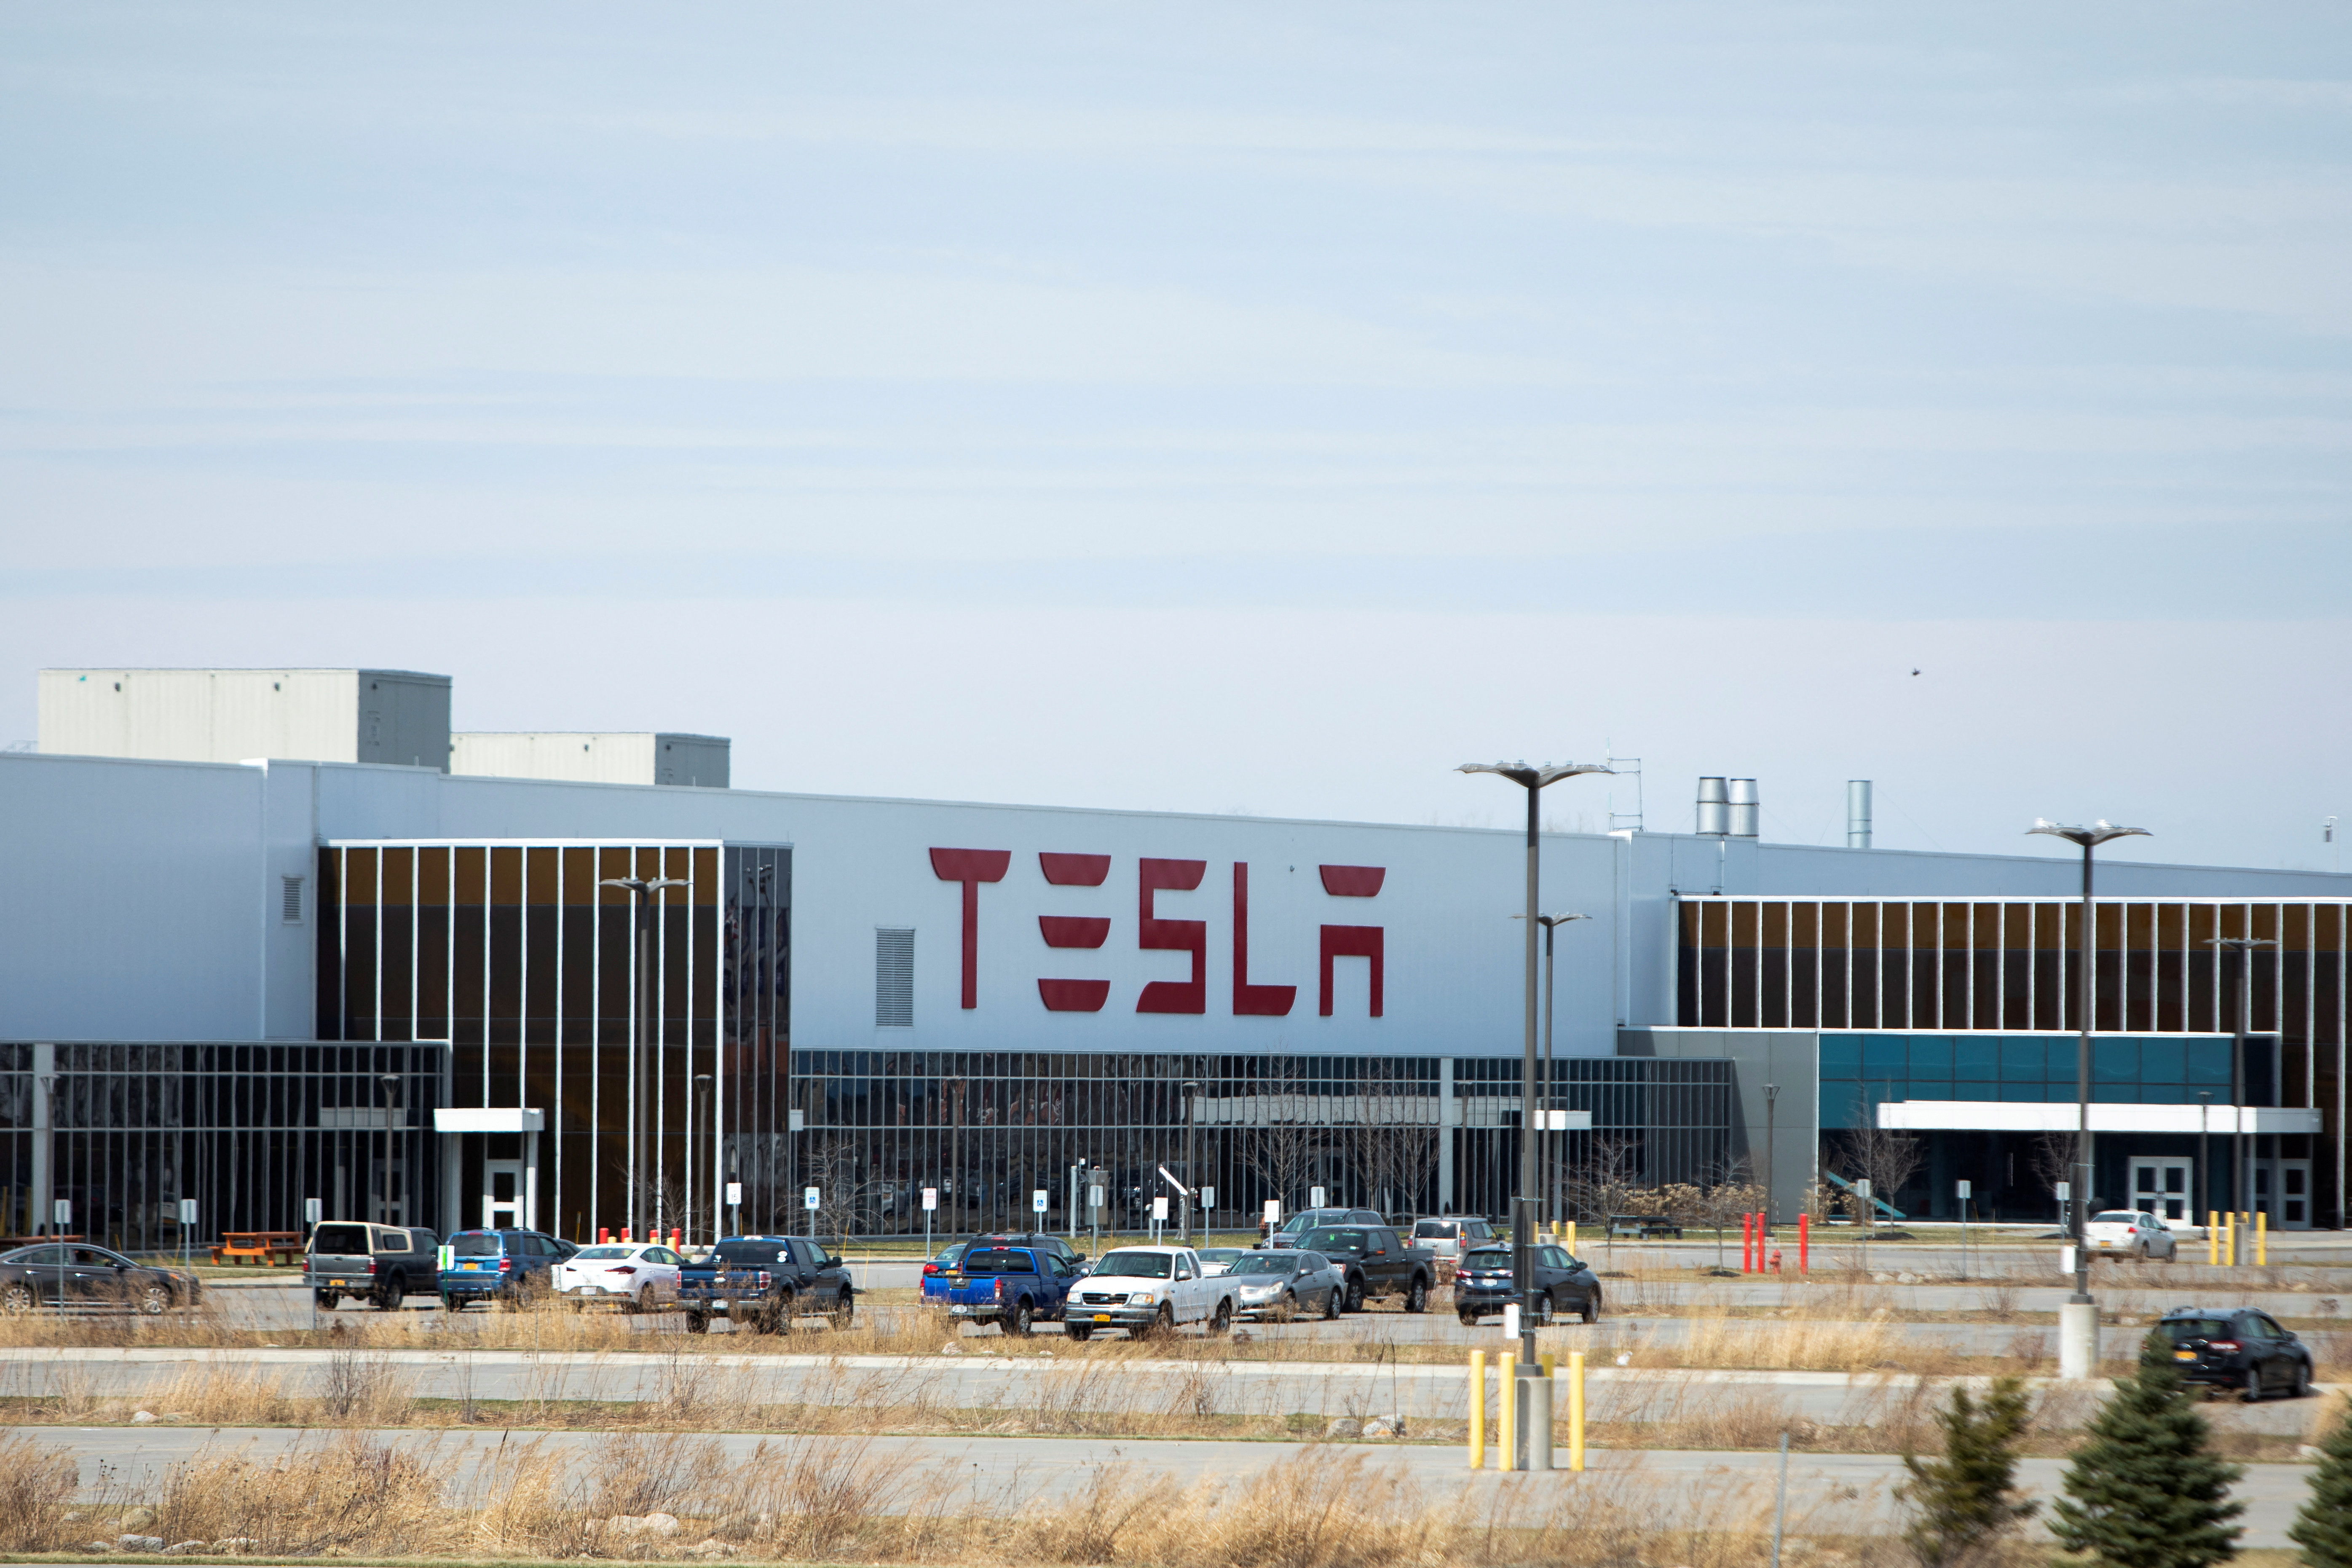 Tesla Inc. Gigafactory 2, which is also known as RiverBend, is pictured during the spread of coronavirus disease (COVID-19), in Buffalo, New York